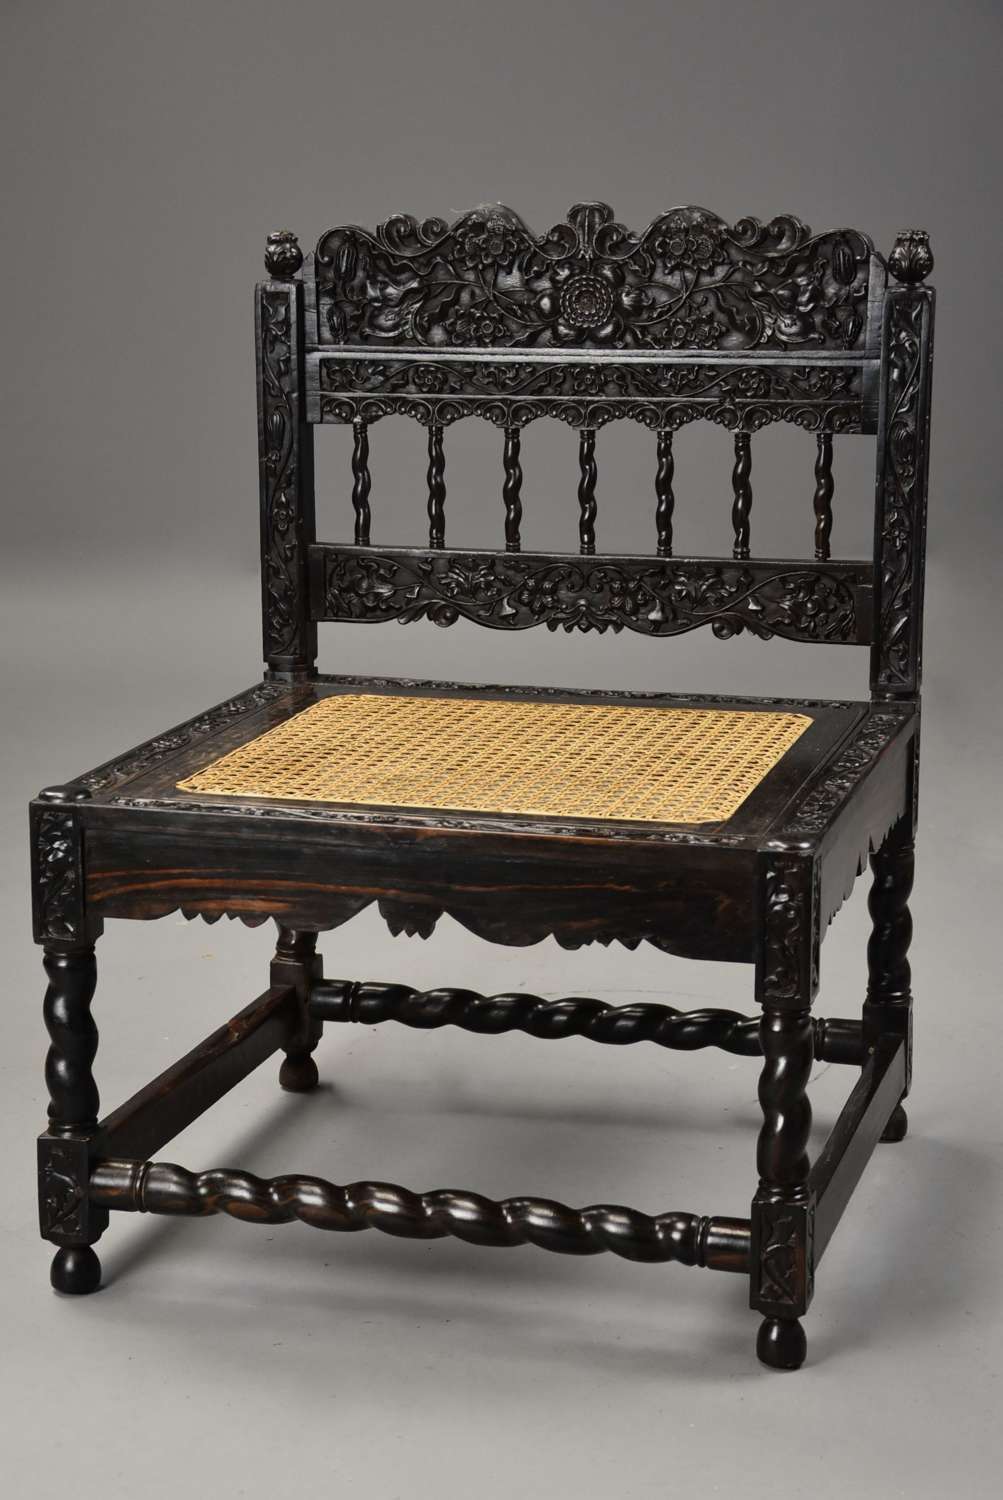 Superb quality 17thc carved ebony chair from The Coromandel Coast